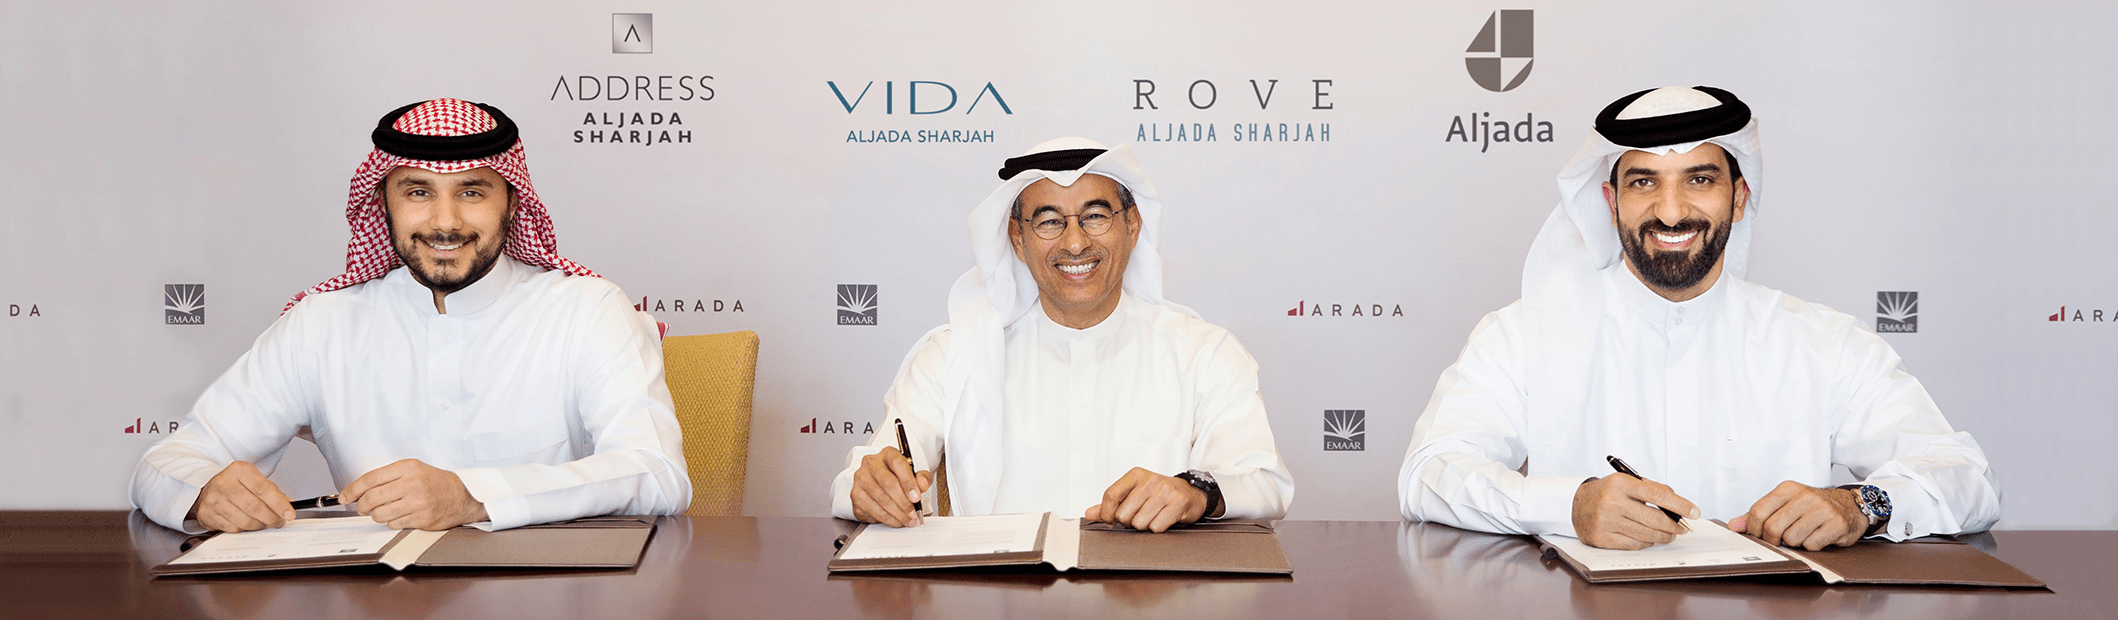 Emaar Hospitality Group and Arada join hands to launch three distinctive hotels in Aljada, Sharjah’s new lifestyle hub